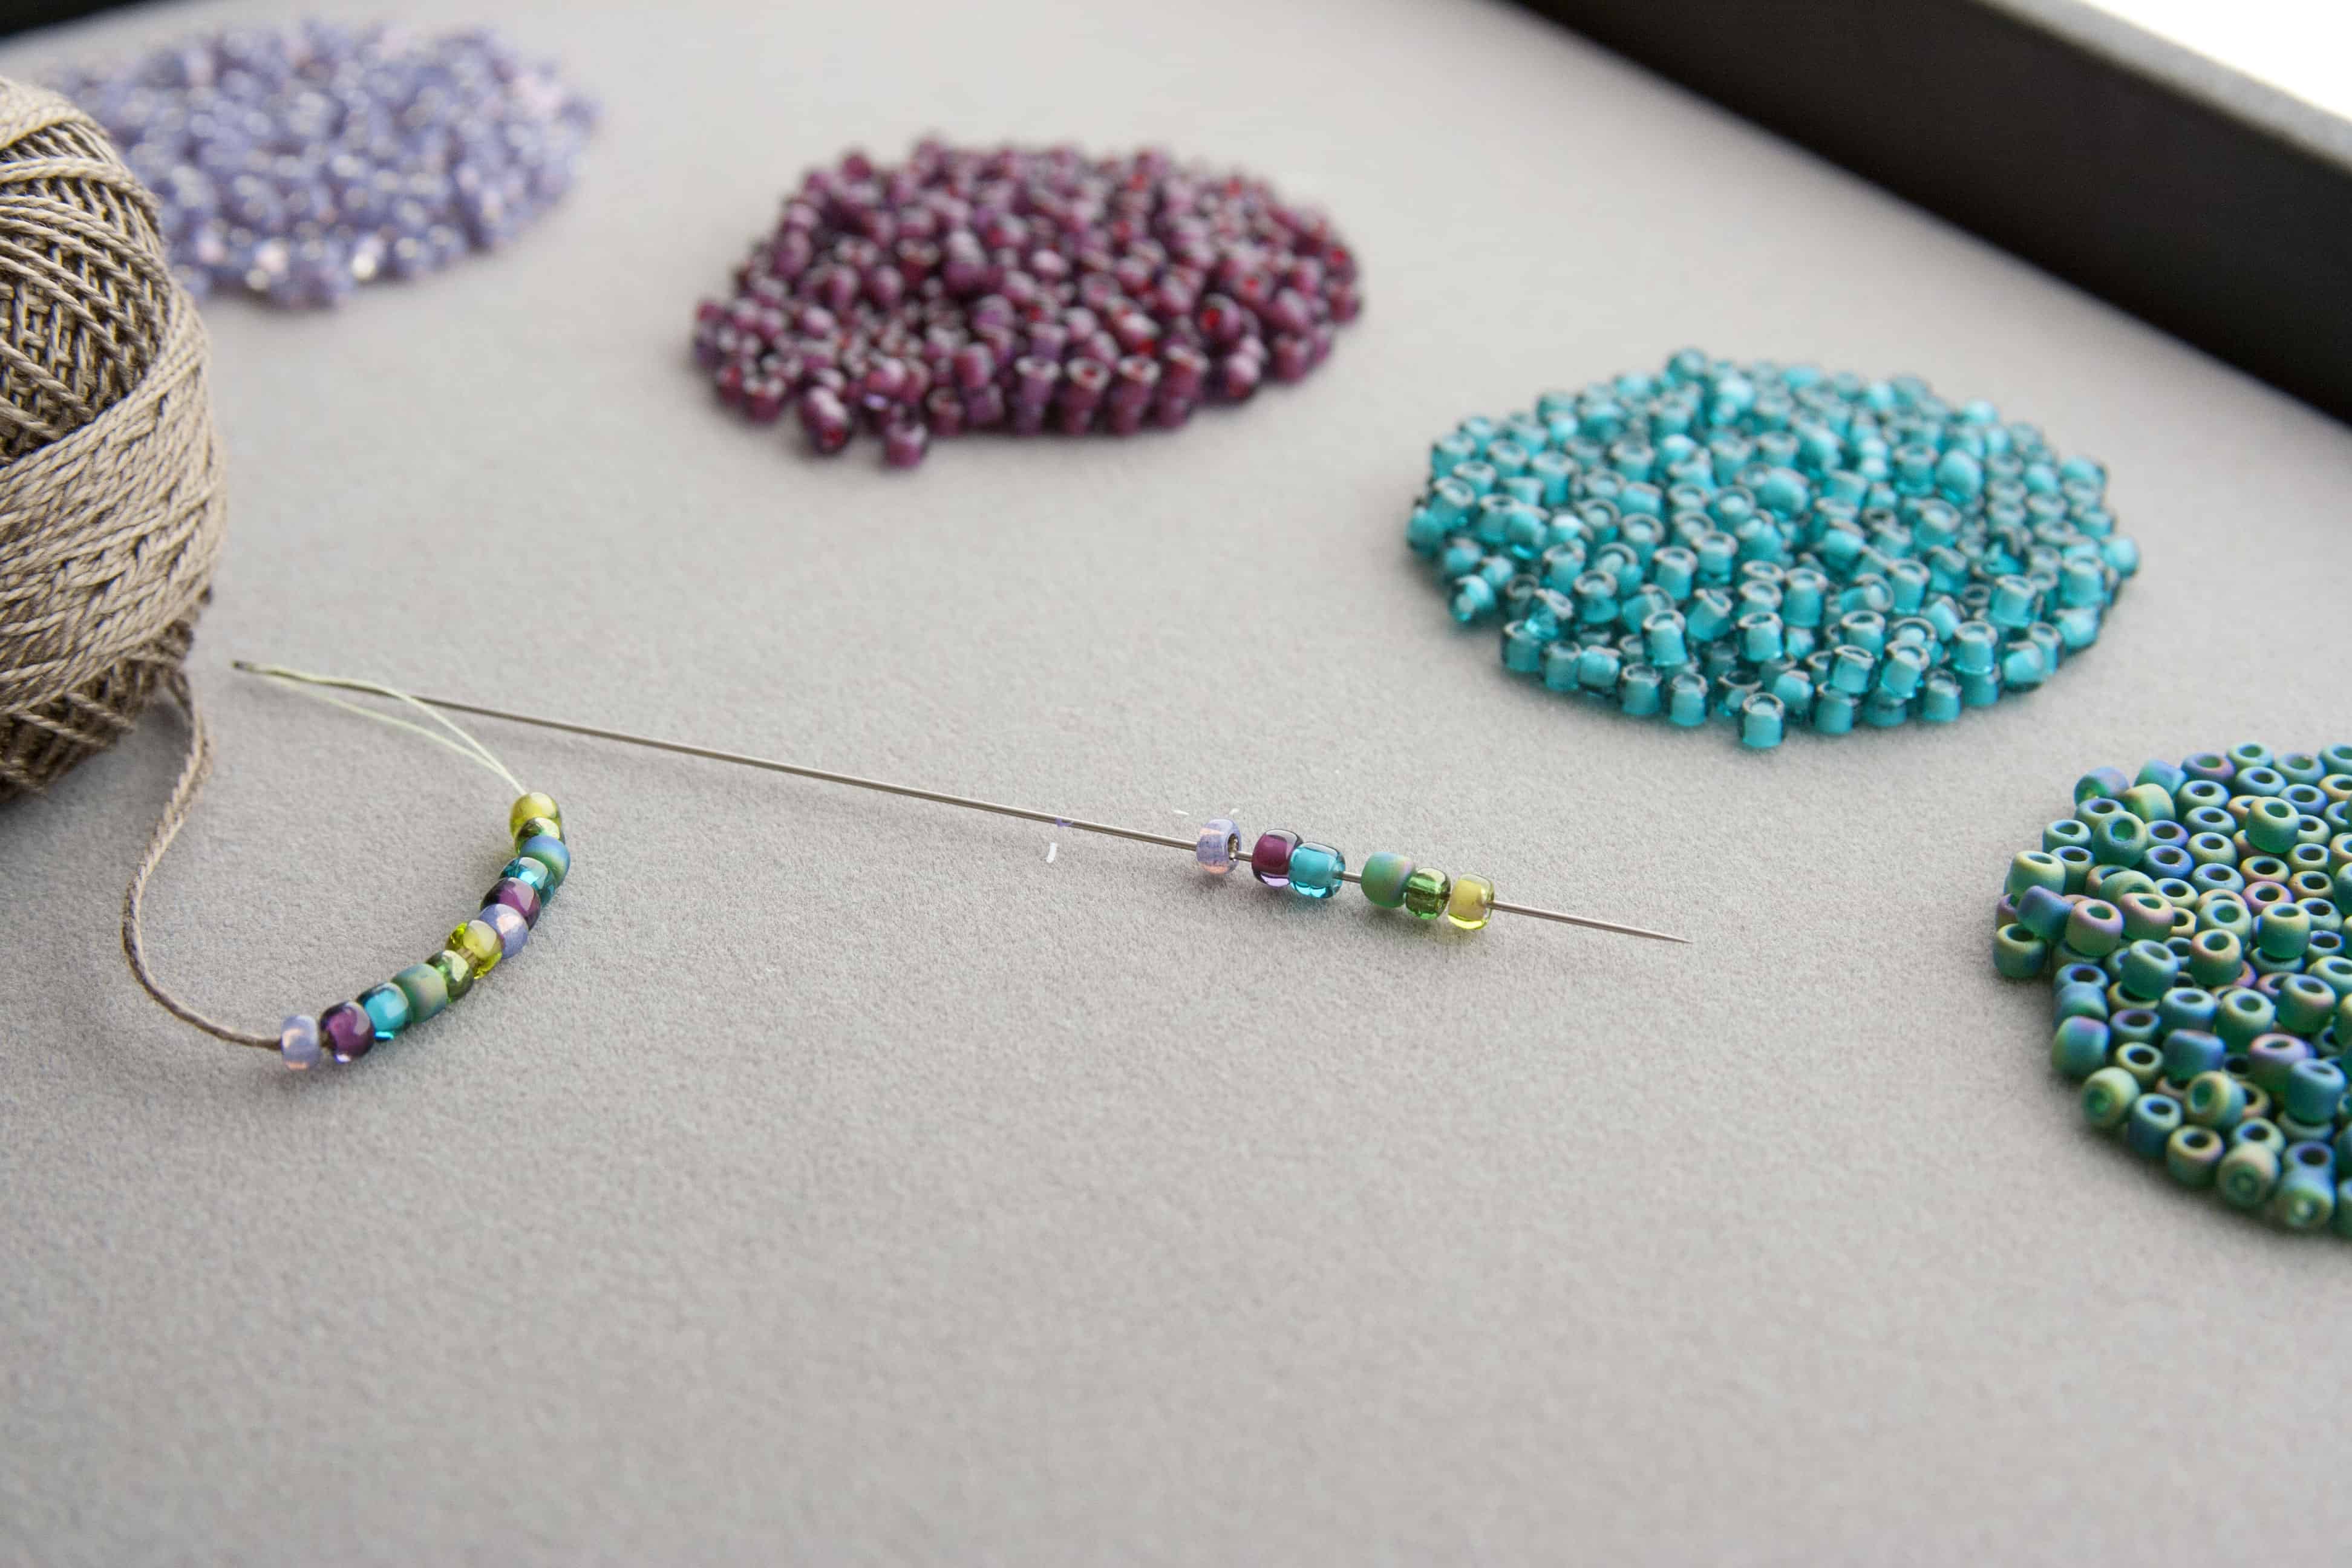 Crochet with beaded string